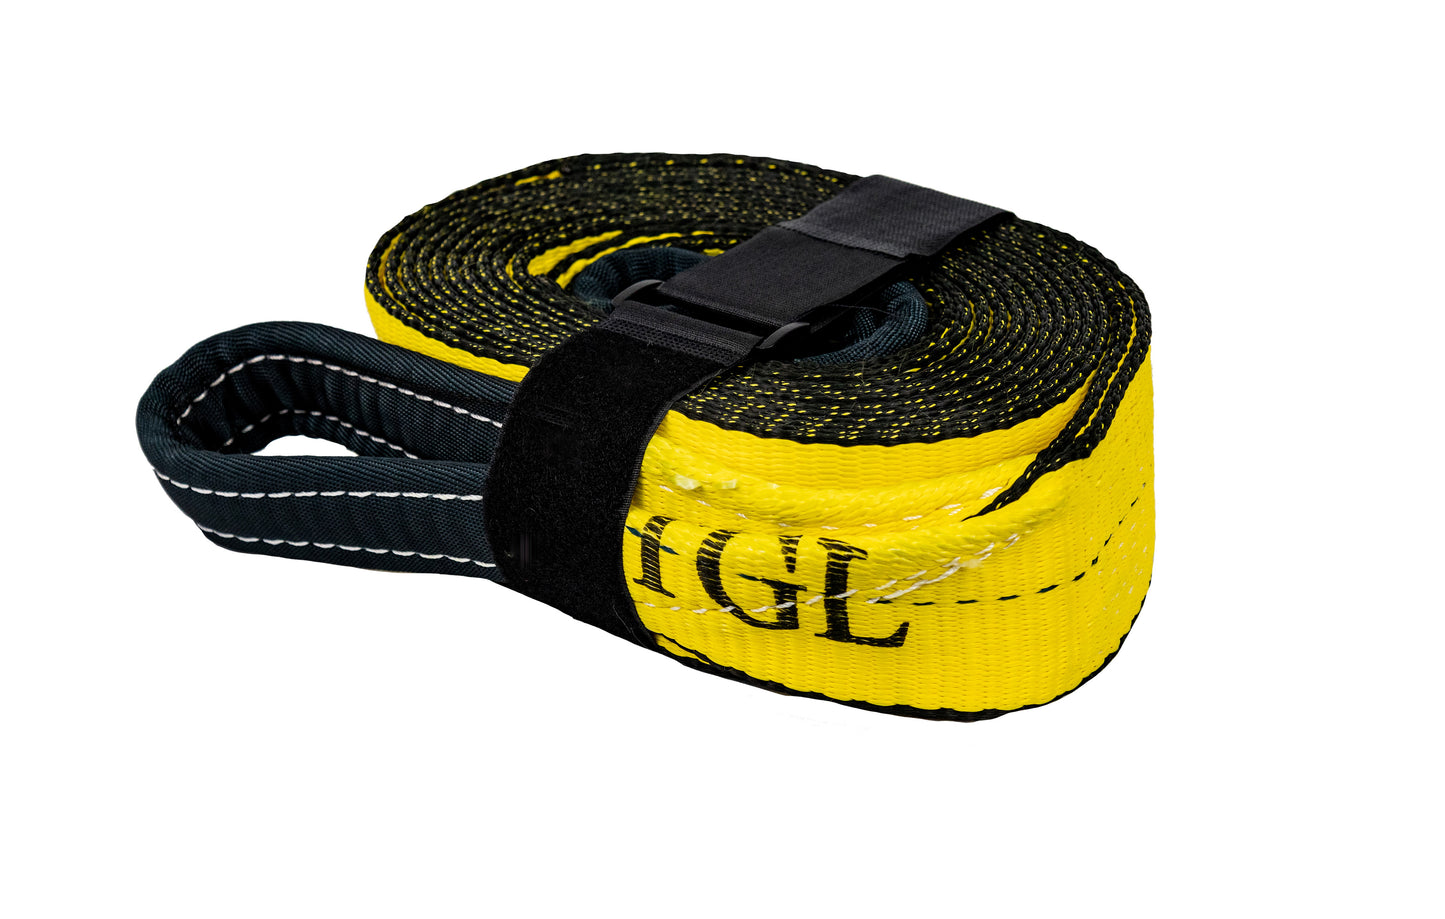 TGL 3 inch, 20 Foot Tow Strap with 2-Pack of 1/2 inch Soft Shackles